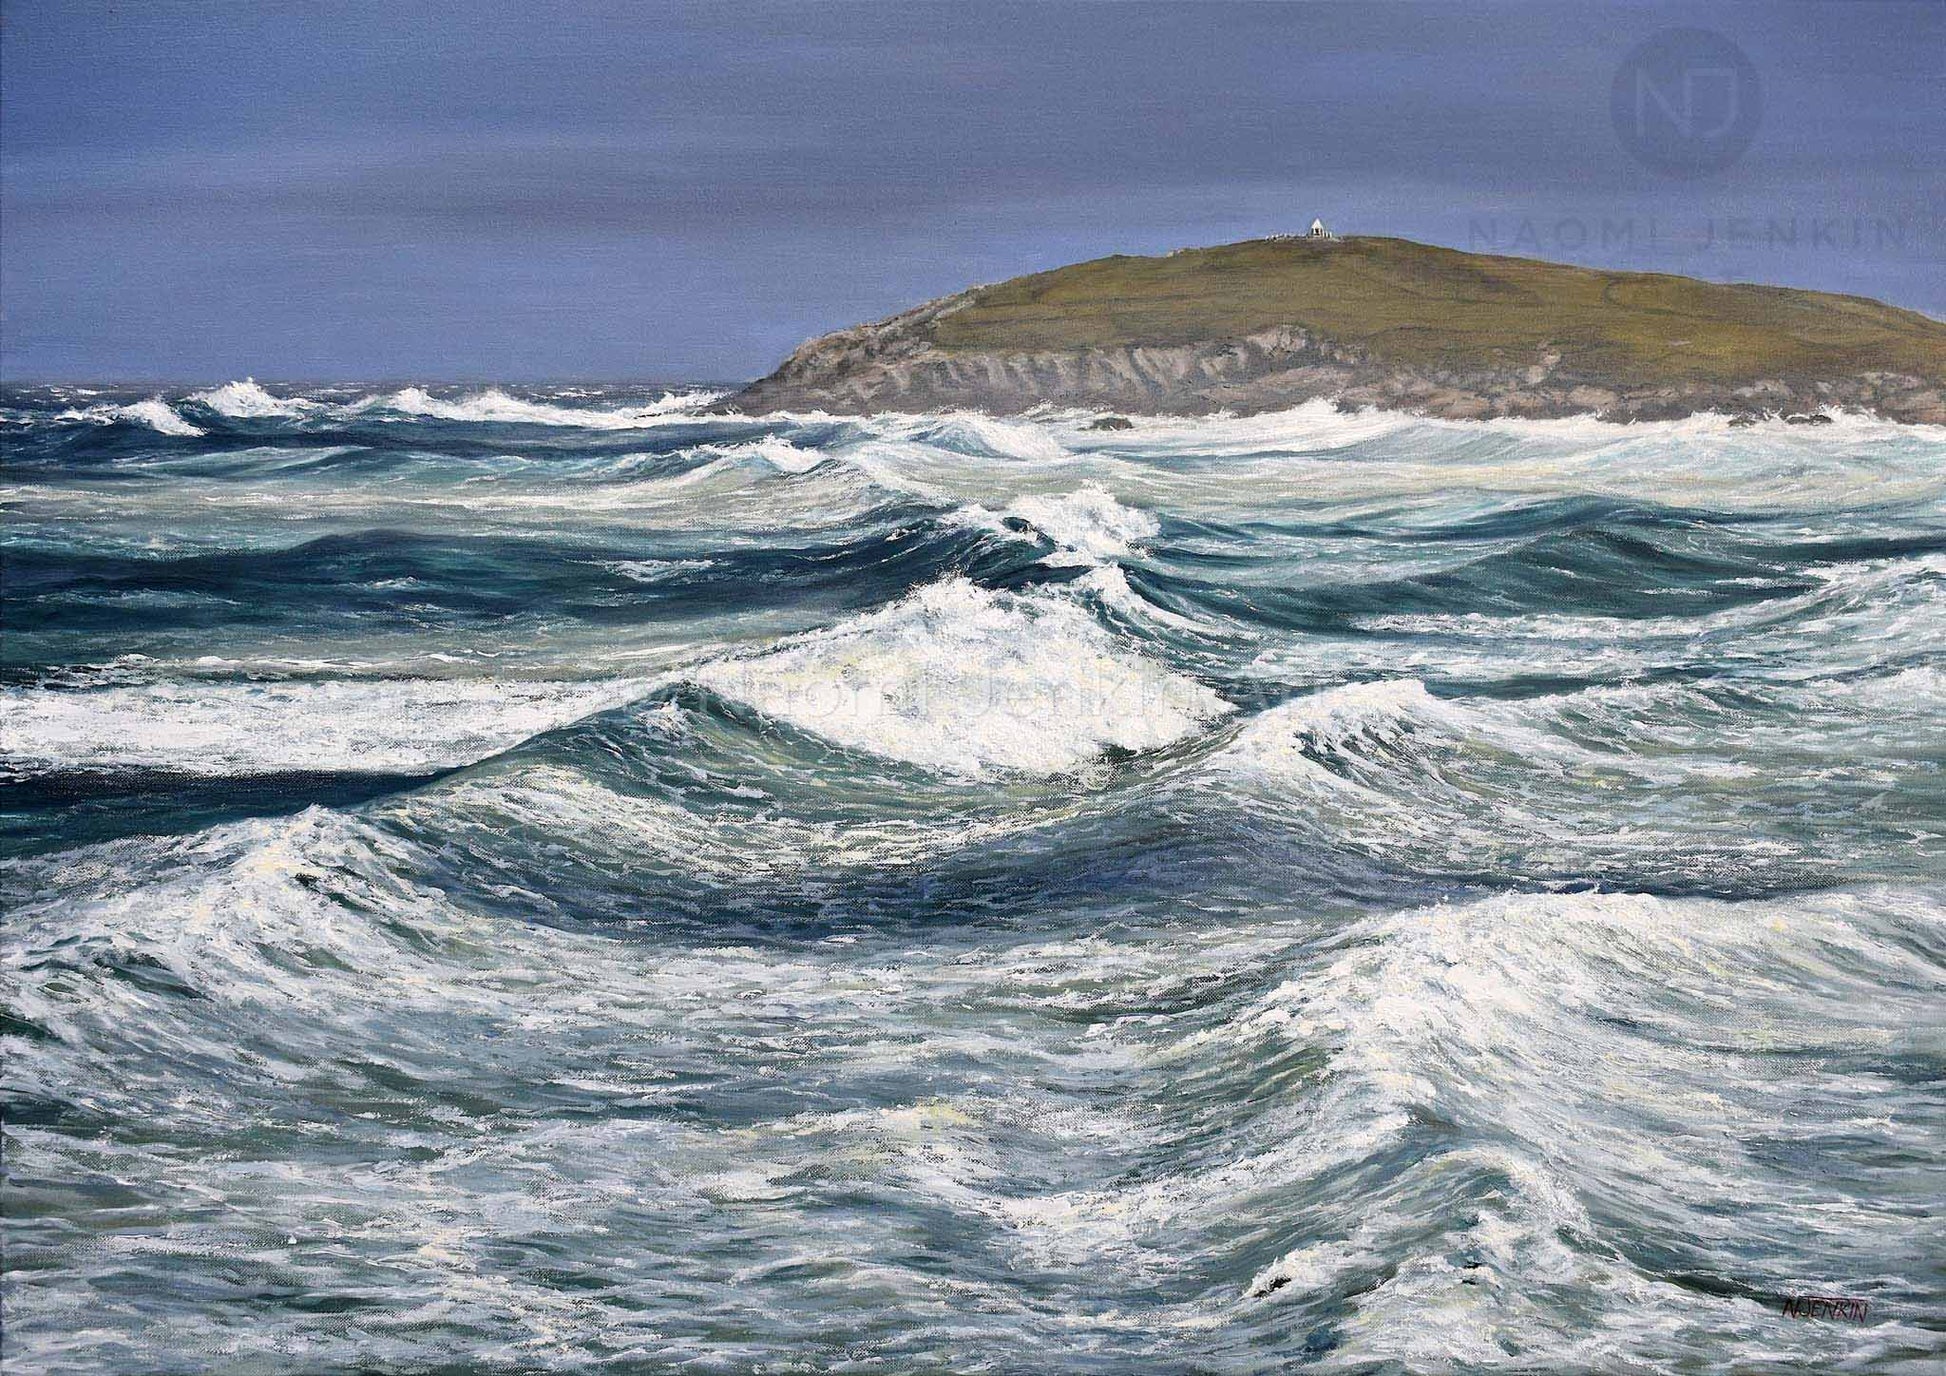 Close up fine art print of stormy seas at fistral beach by seascape artist Naomi Jenkin